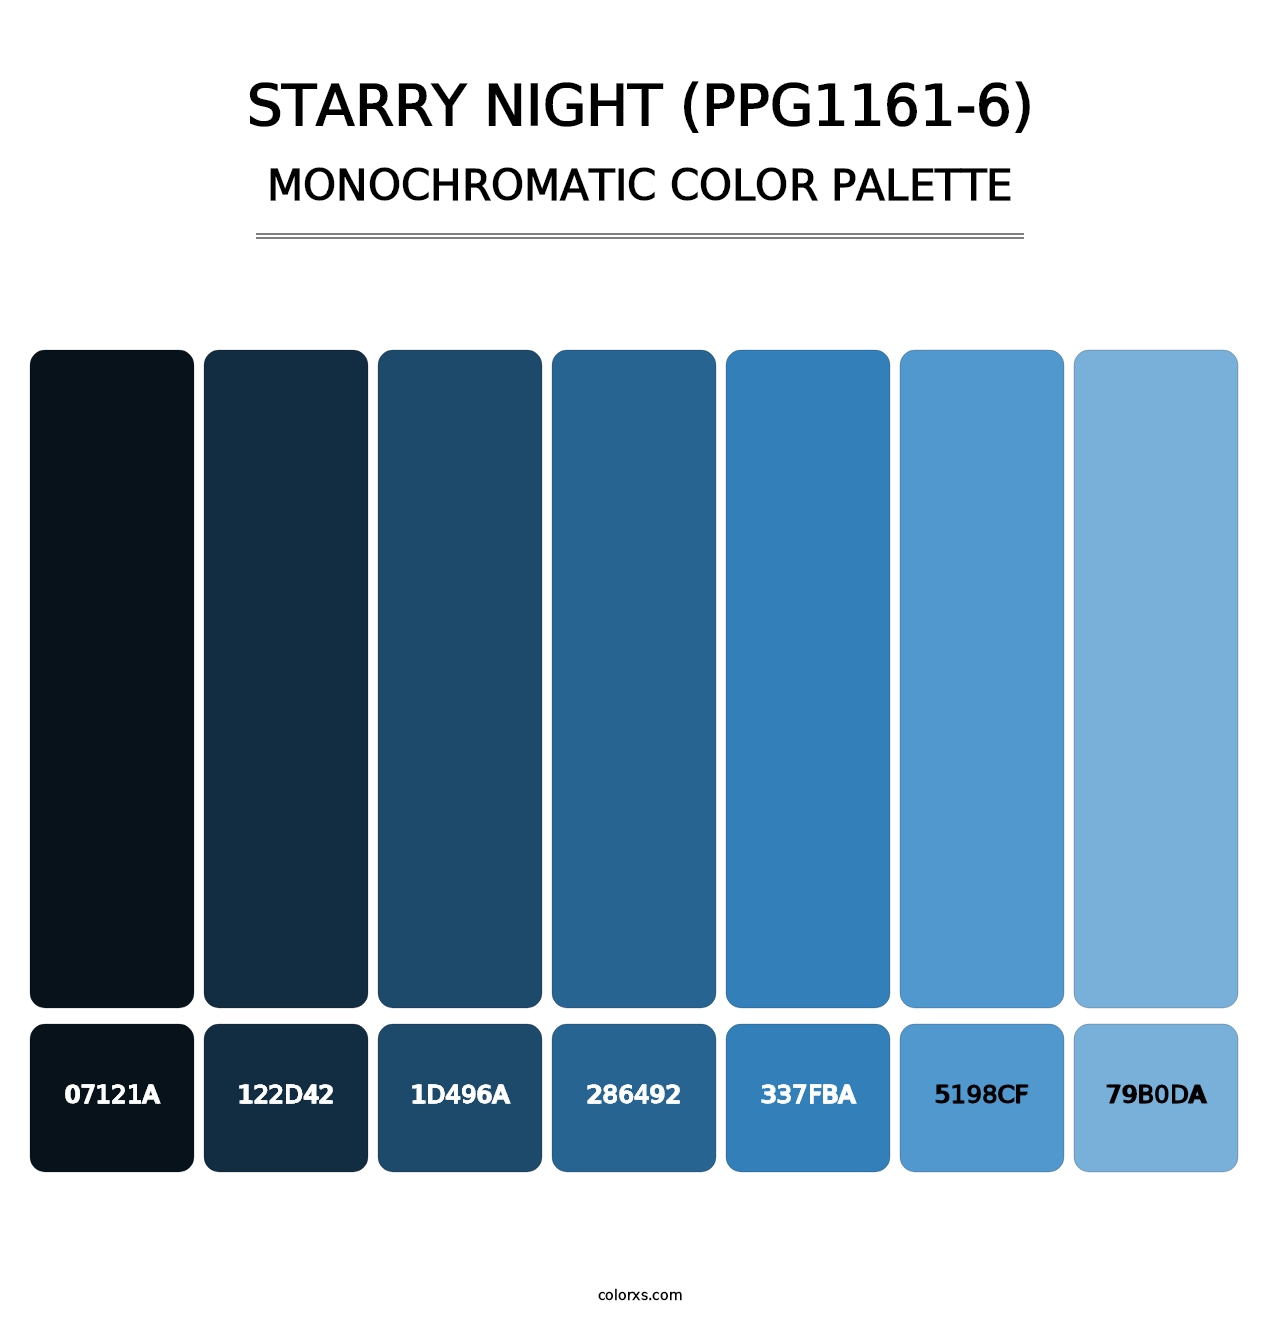 Starry Night (PPG1161-6) - Monochromatic Color Palette